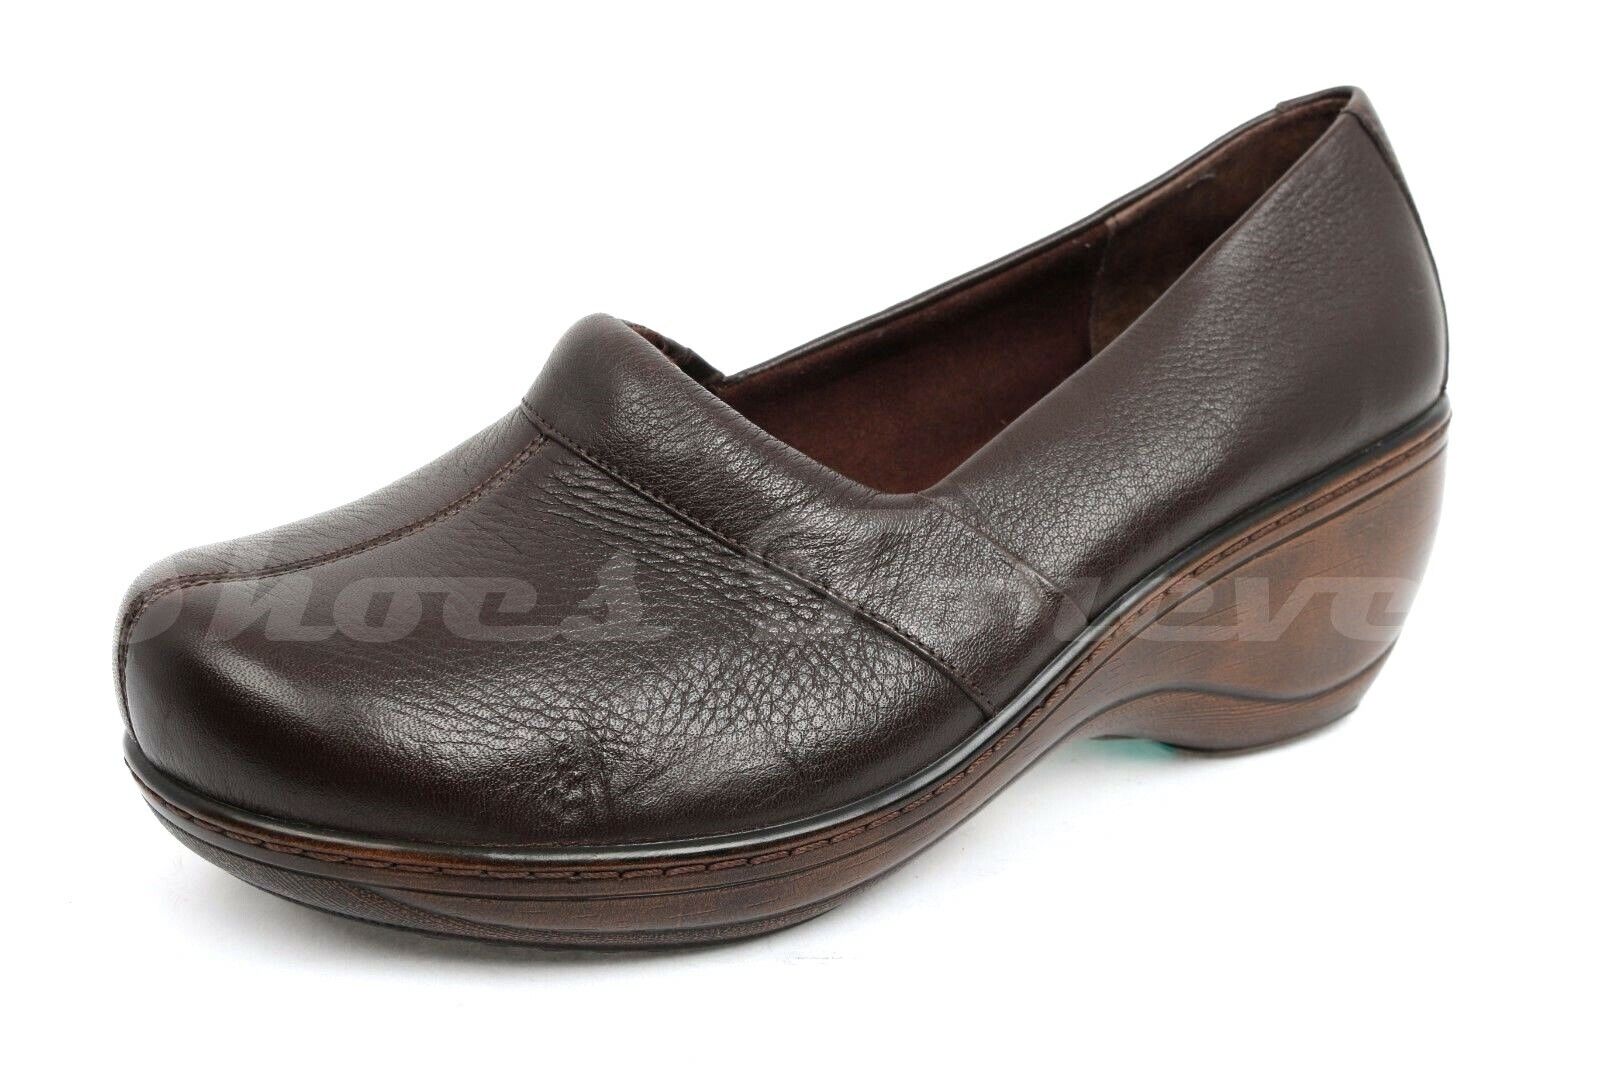 Womens SOFT 4 years warranty WALK brown leather sz. 9 NEW Year-end gift clogs